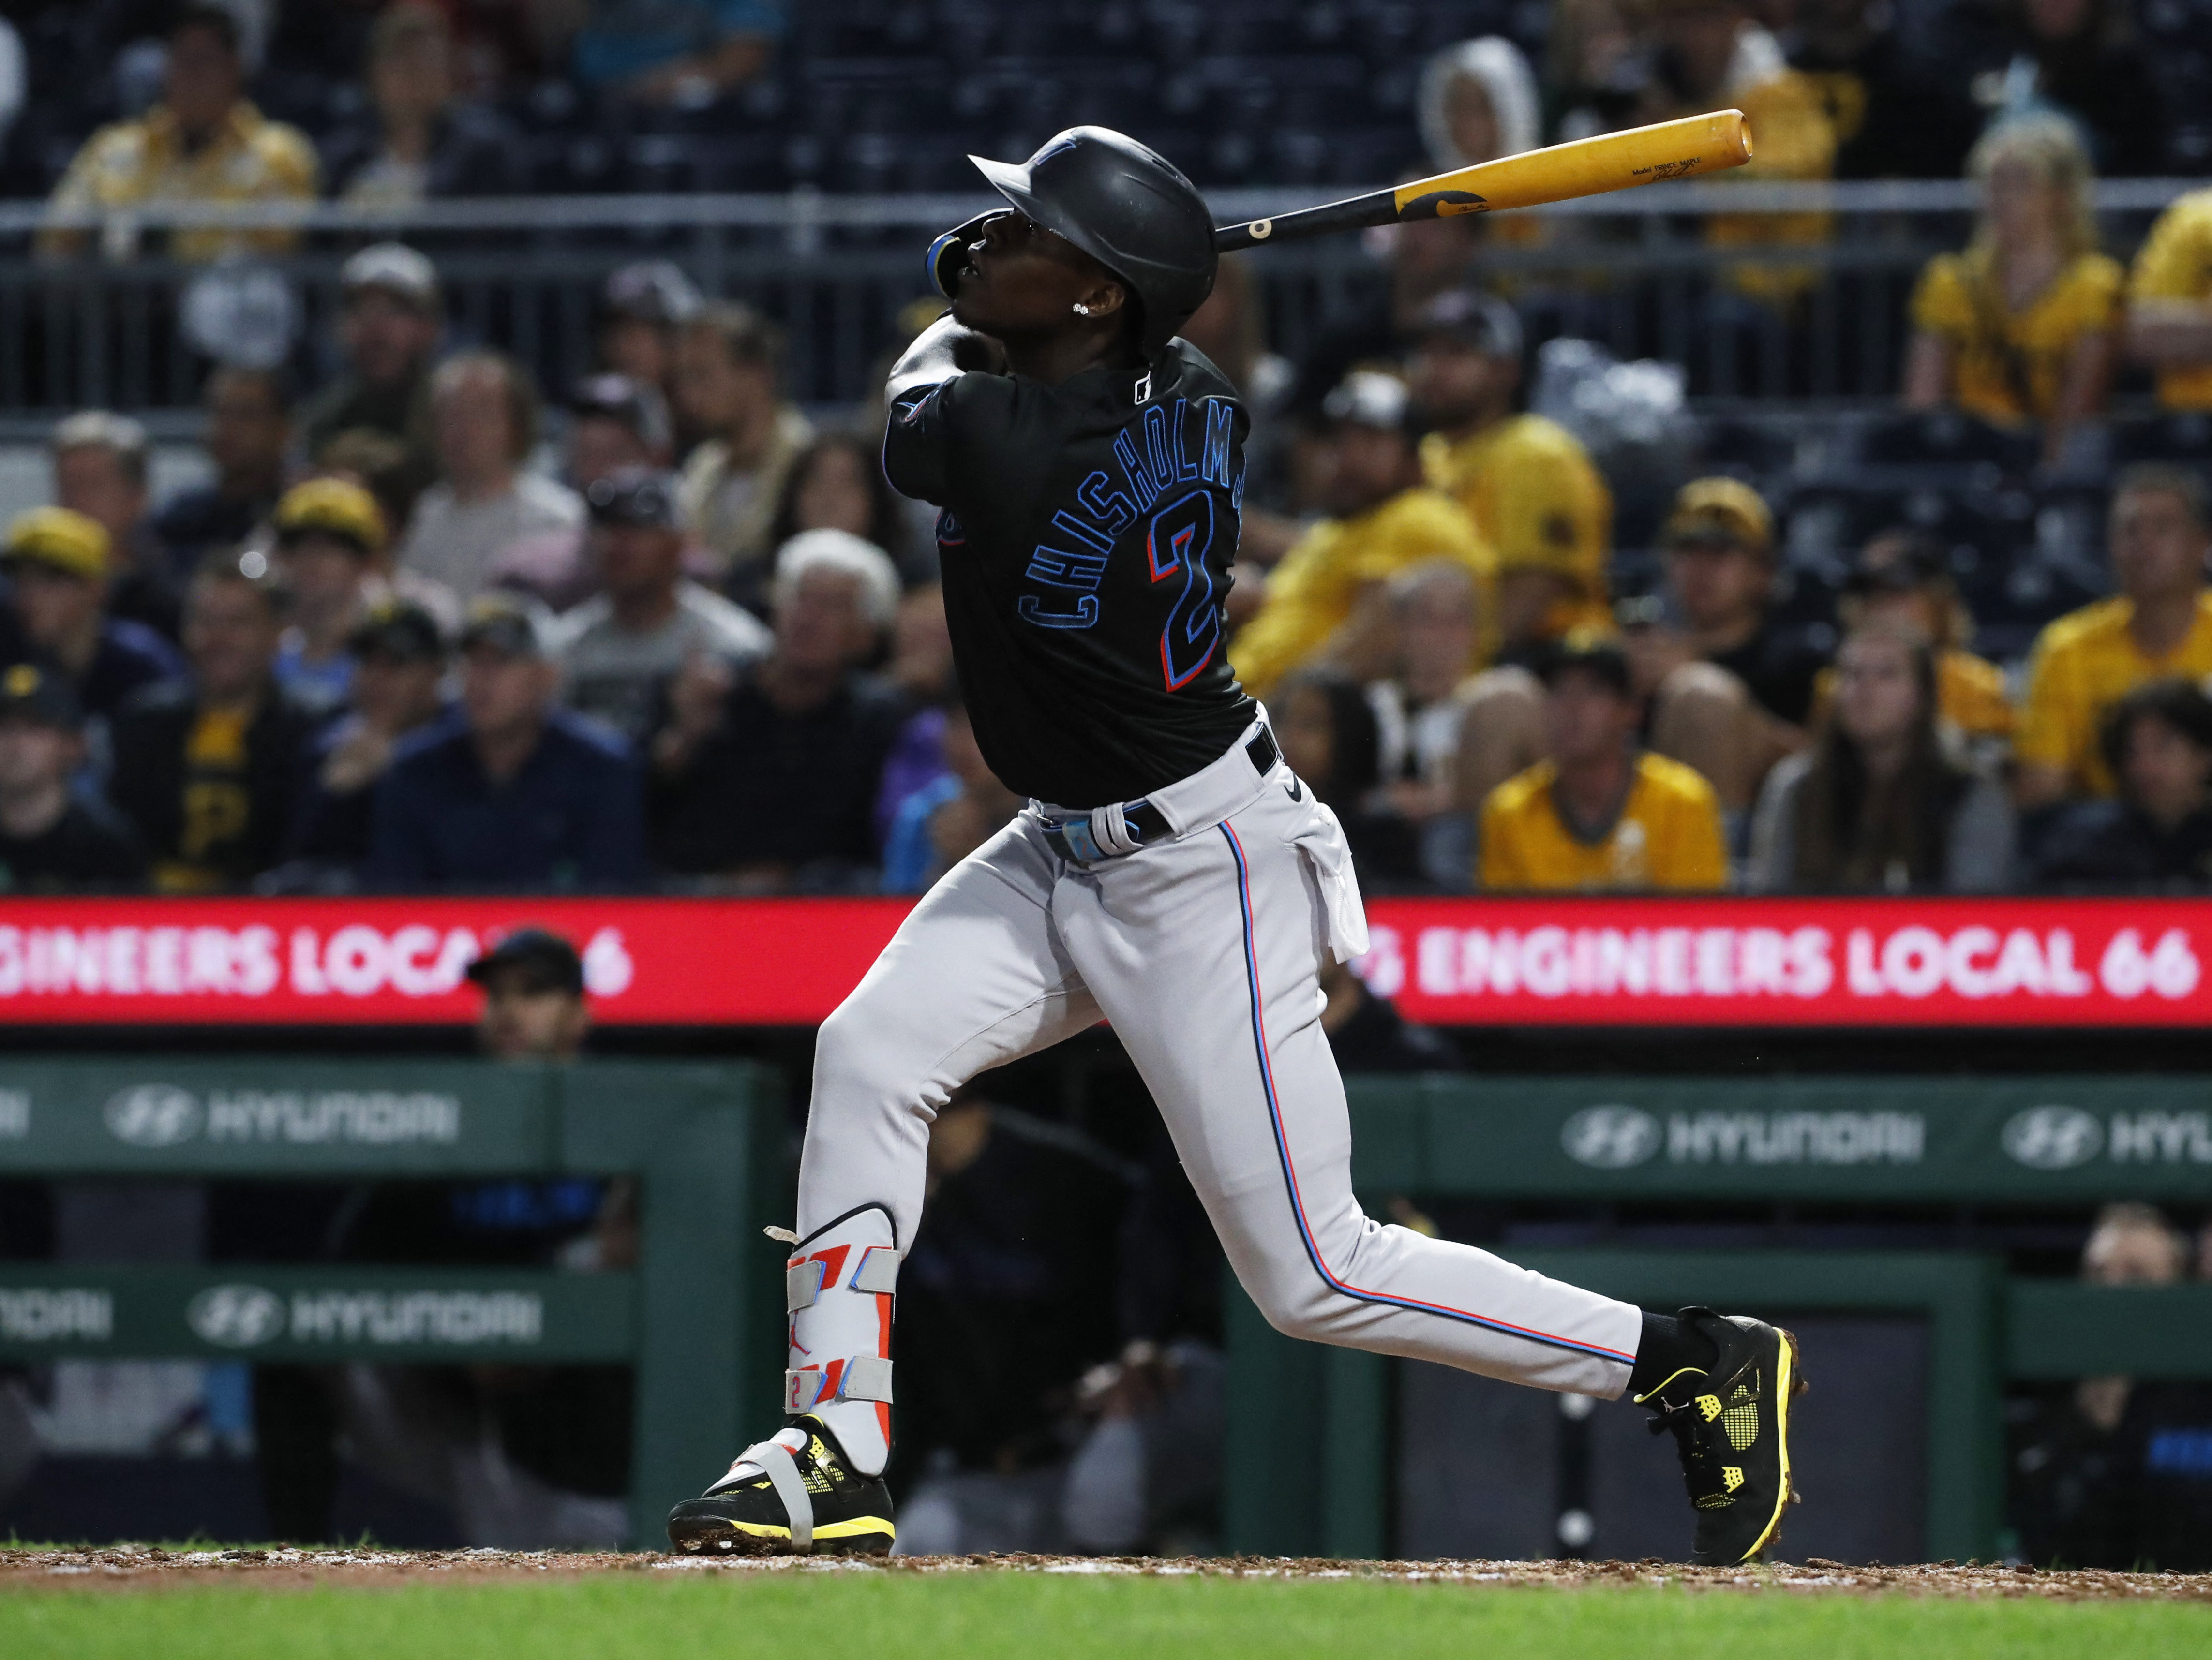 Marlins come back late to top Pirates